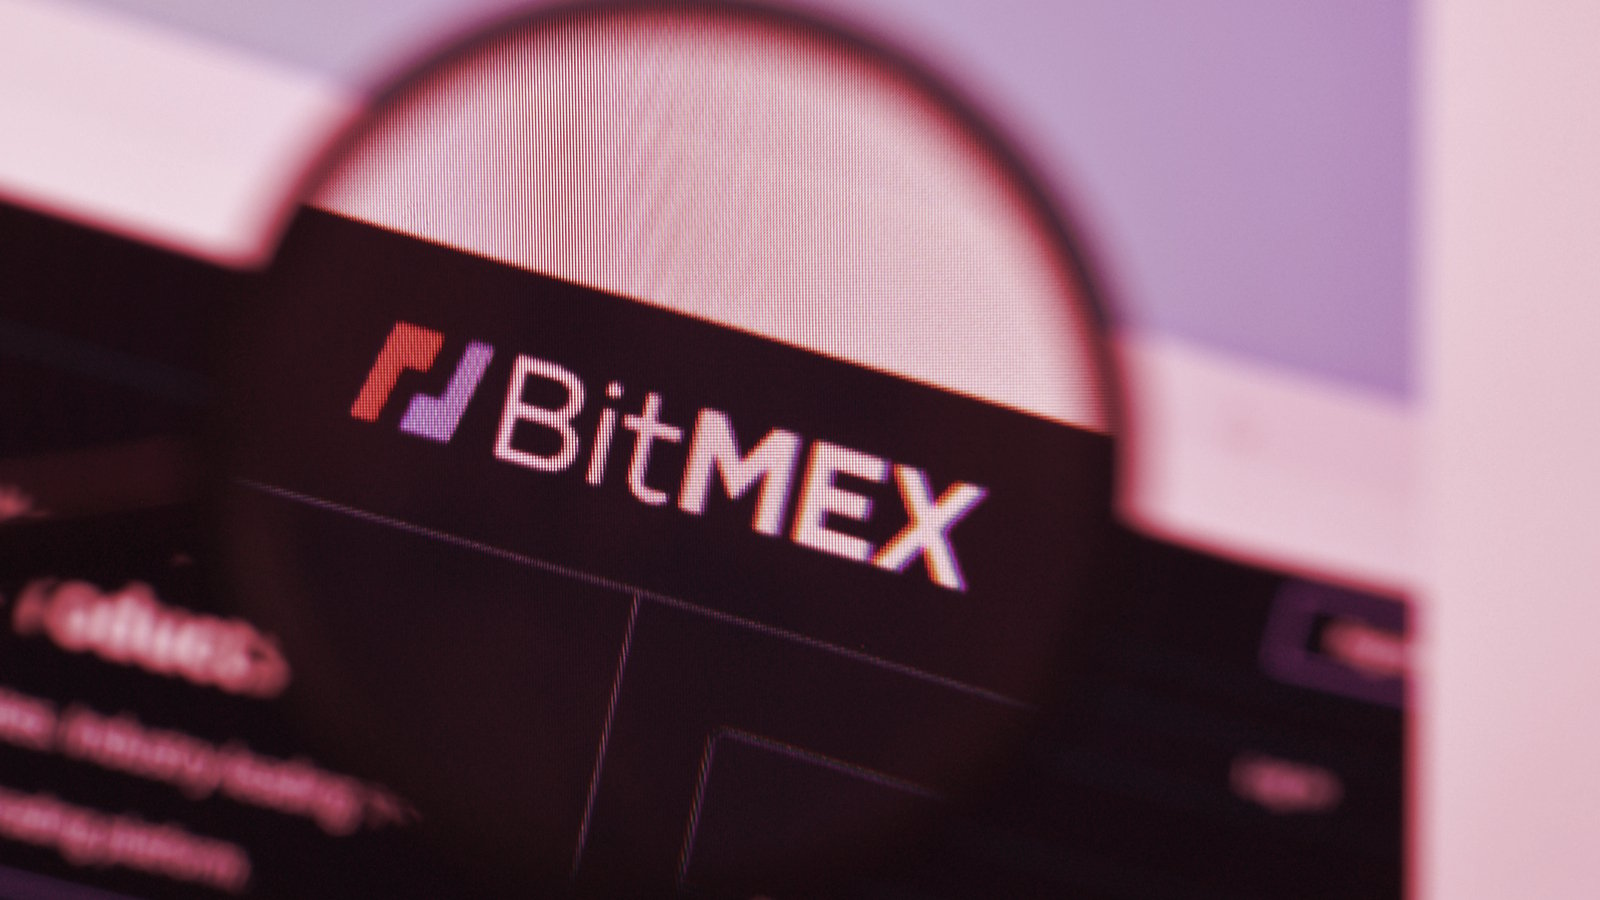 Crypto Mogul Greg Dwyer Buys More Time in BitMEX Case